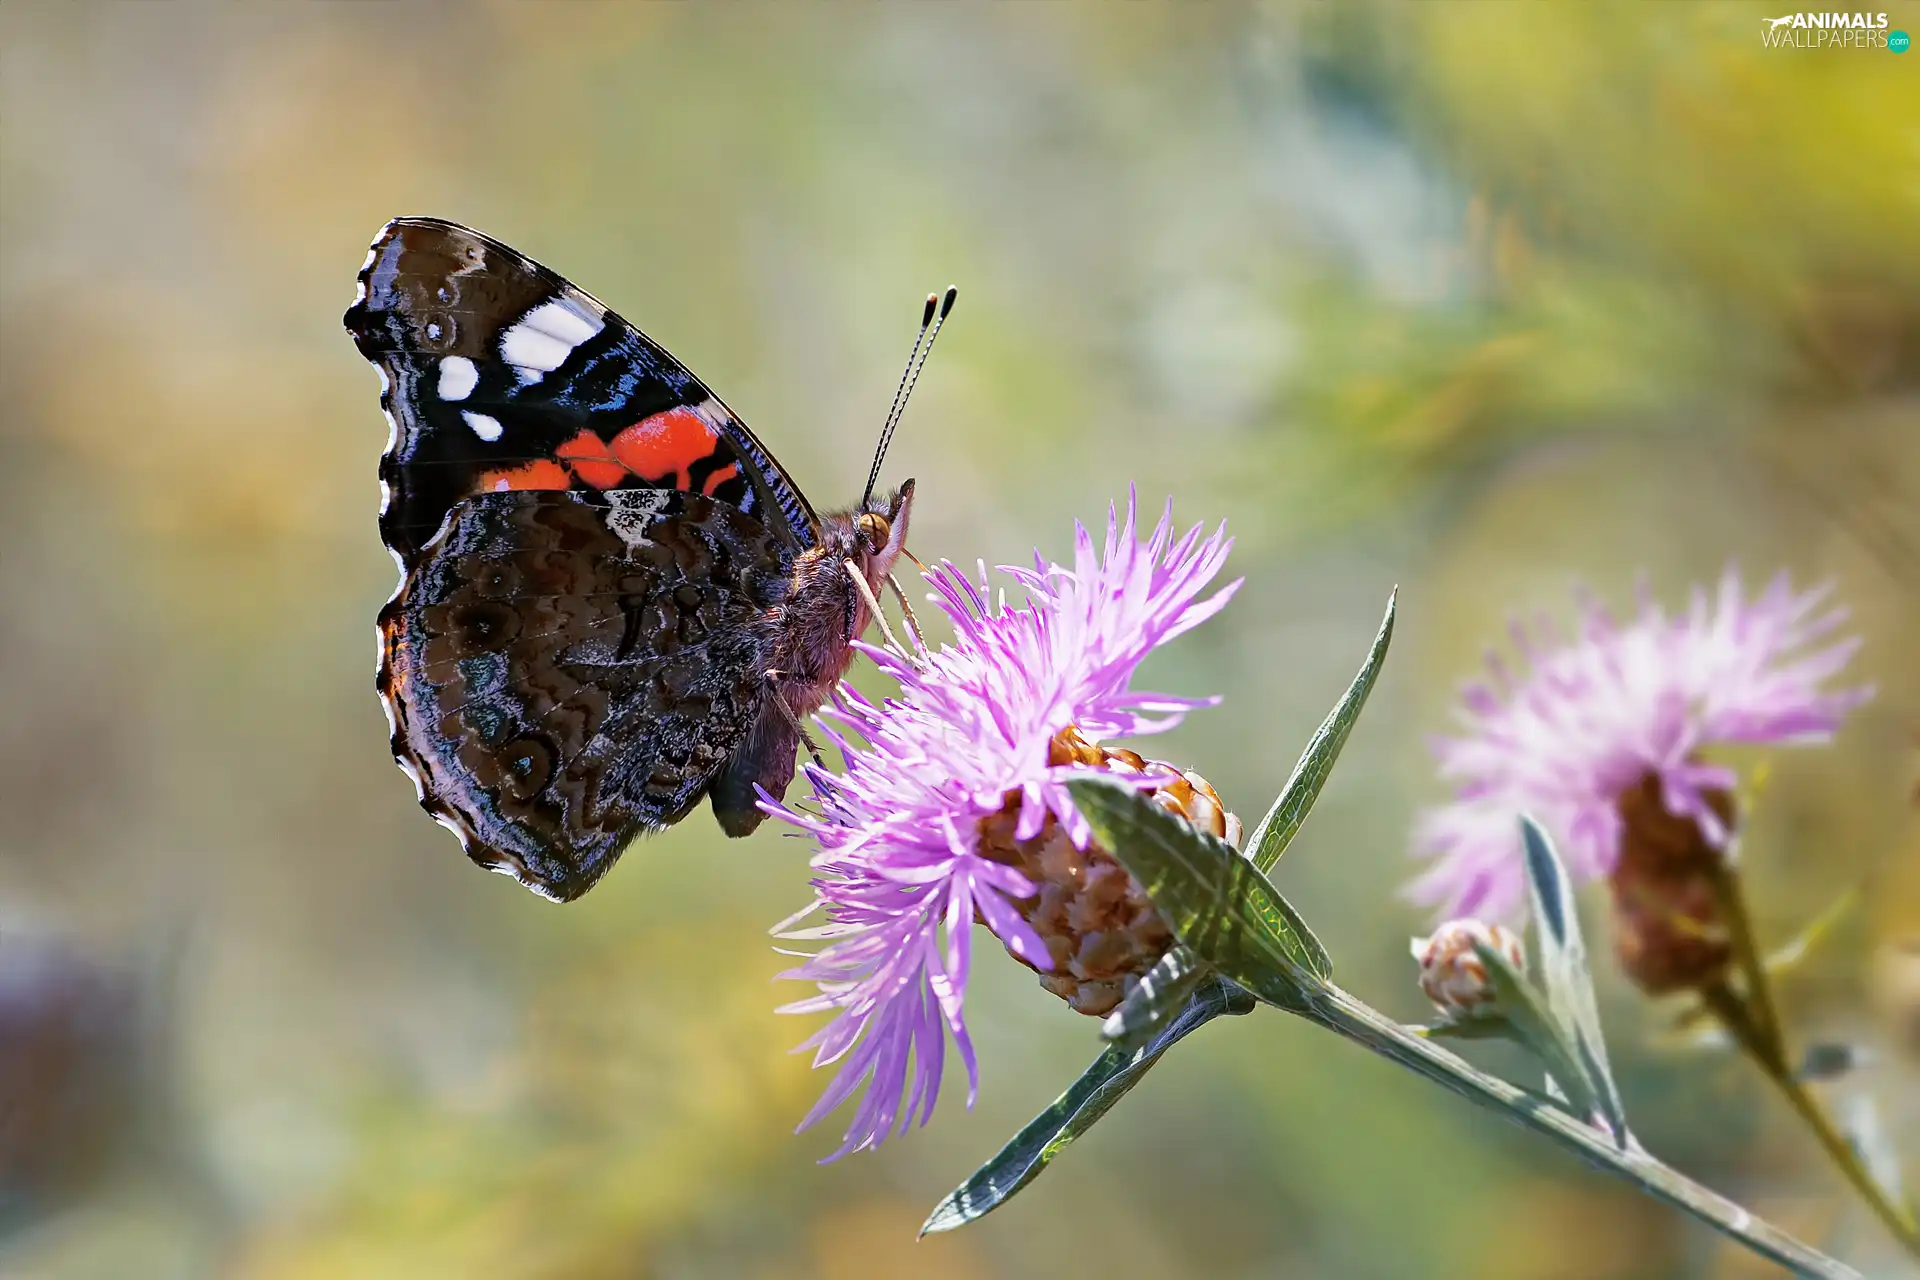 fuzzy, background, Mermaid Admiral, Flowers, butterfly